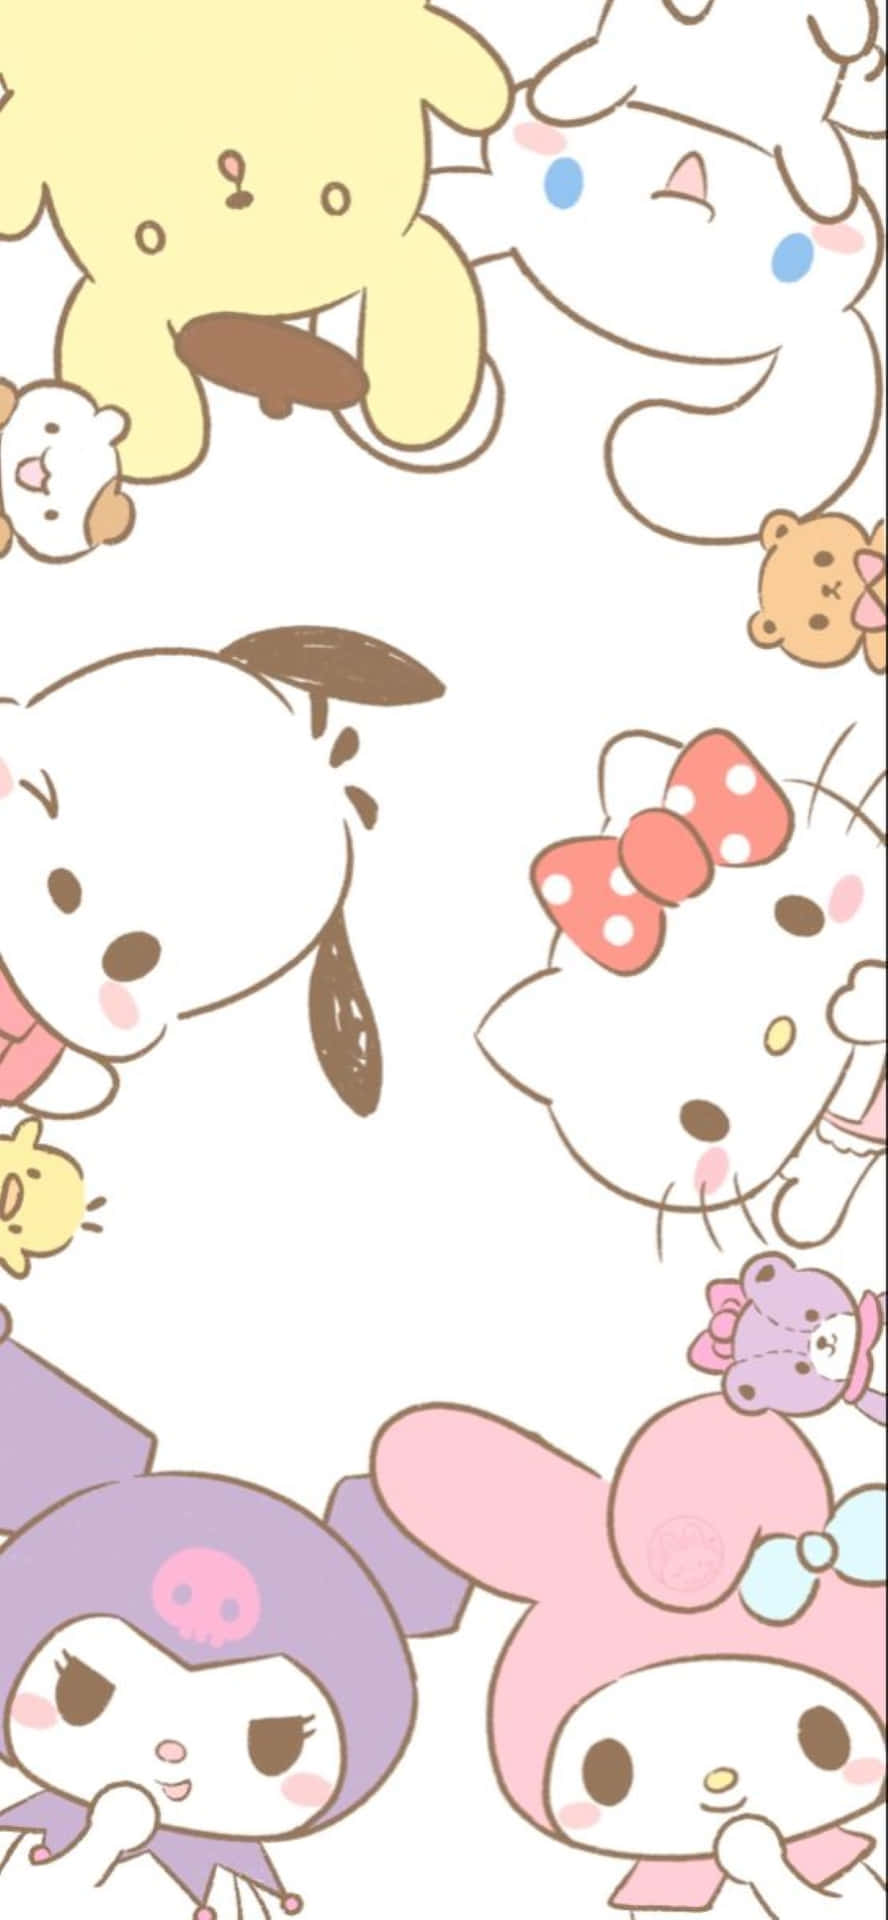 [100+] Hello Kitty And Friends Wallpapers | Wallpapers.com